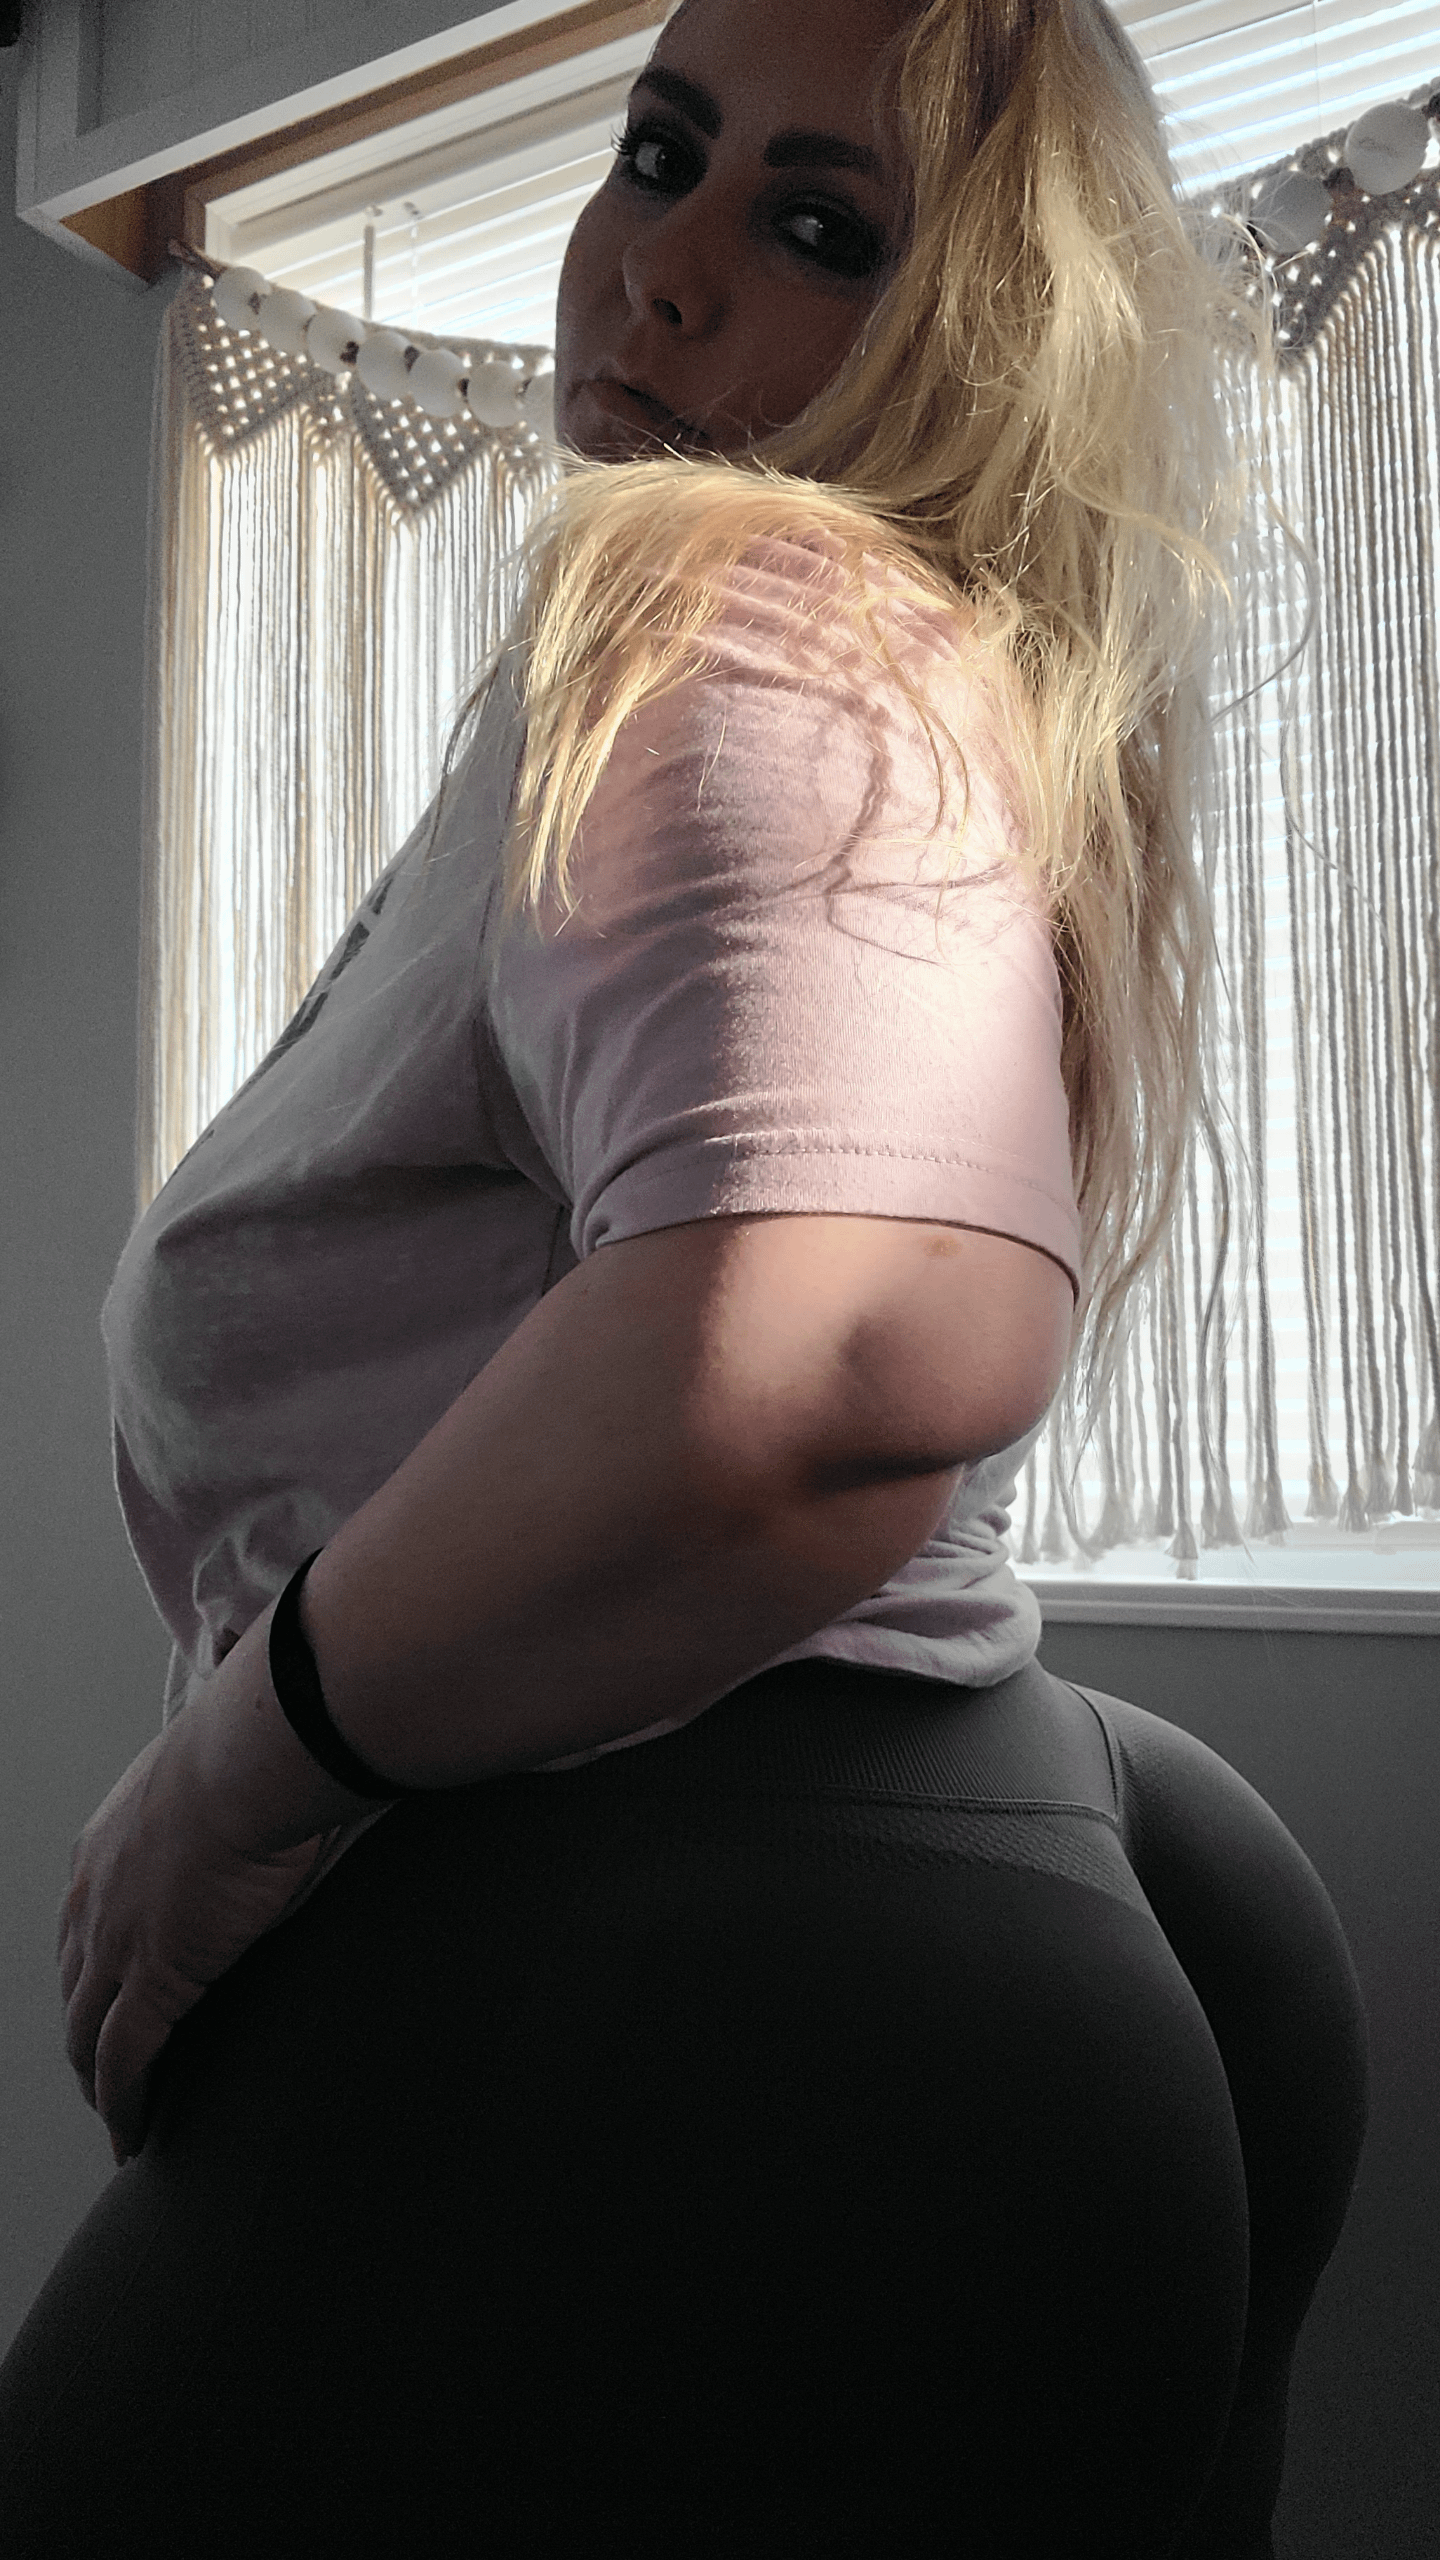 PAWG My bday is tomorrow Need some extra PAWG love